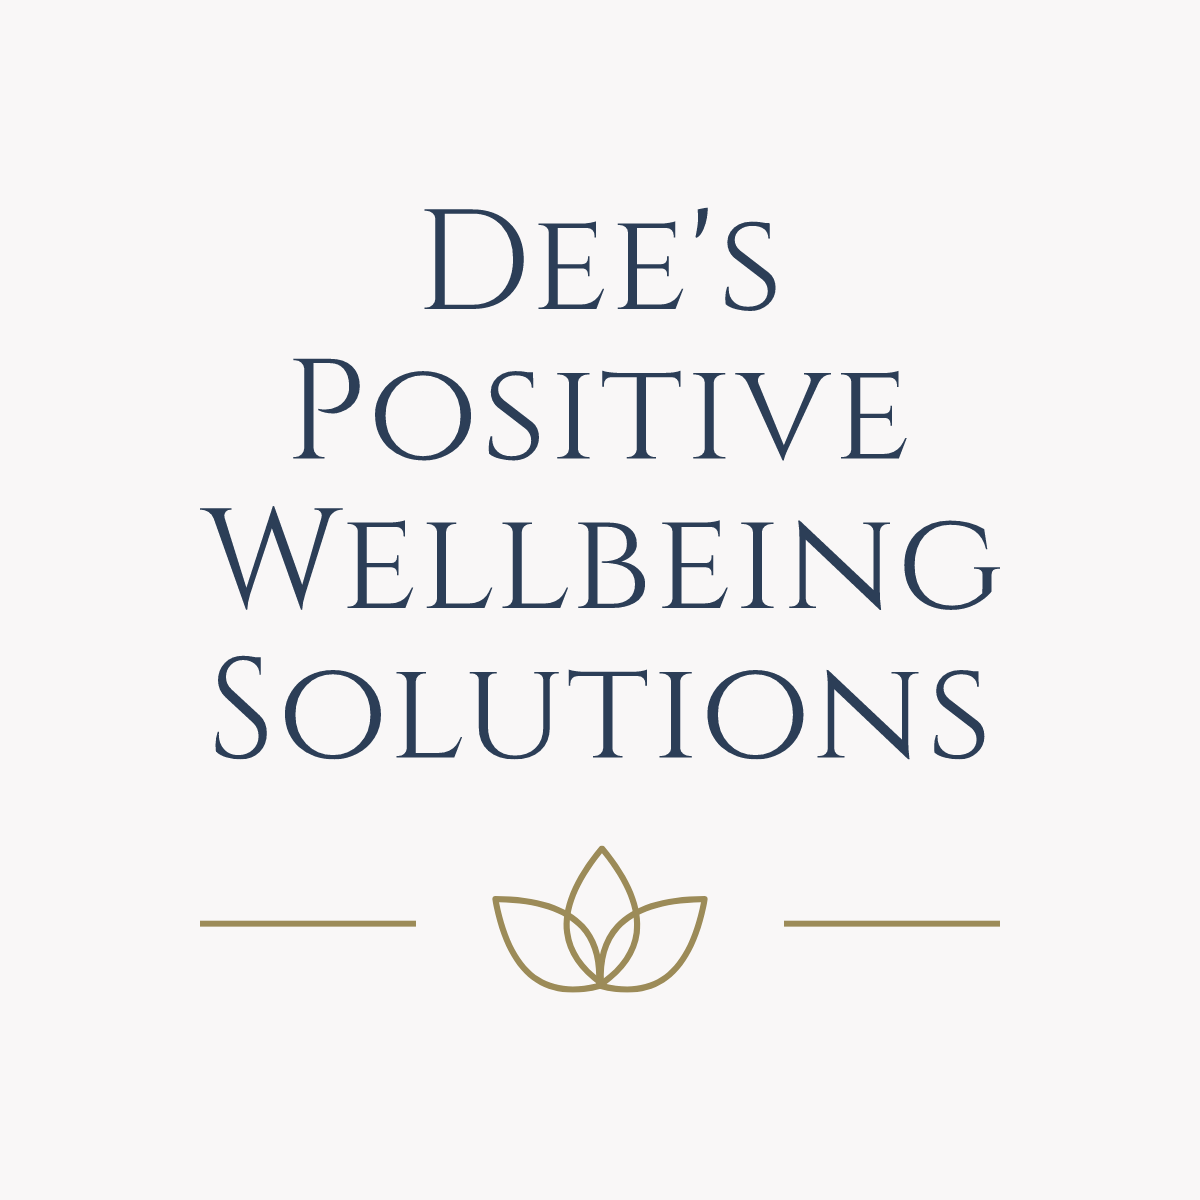 Dee's Positive Wellbeing Solutions Logo with a 3 petaled image on a calming soft beige background